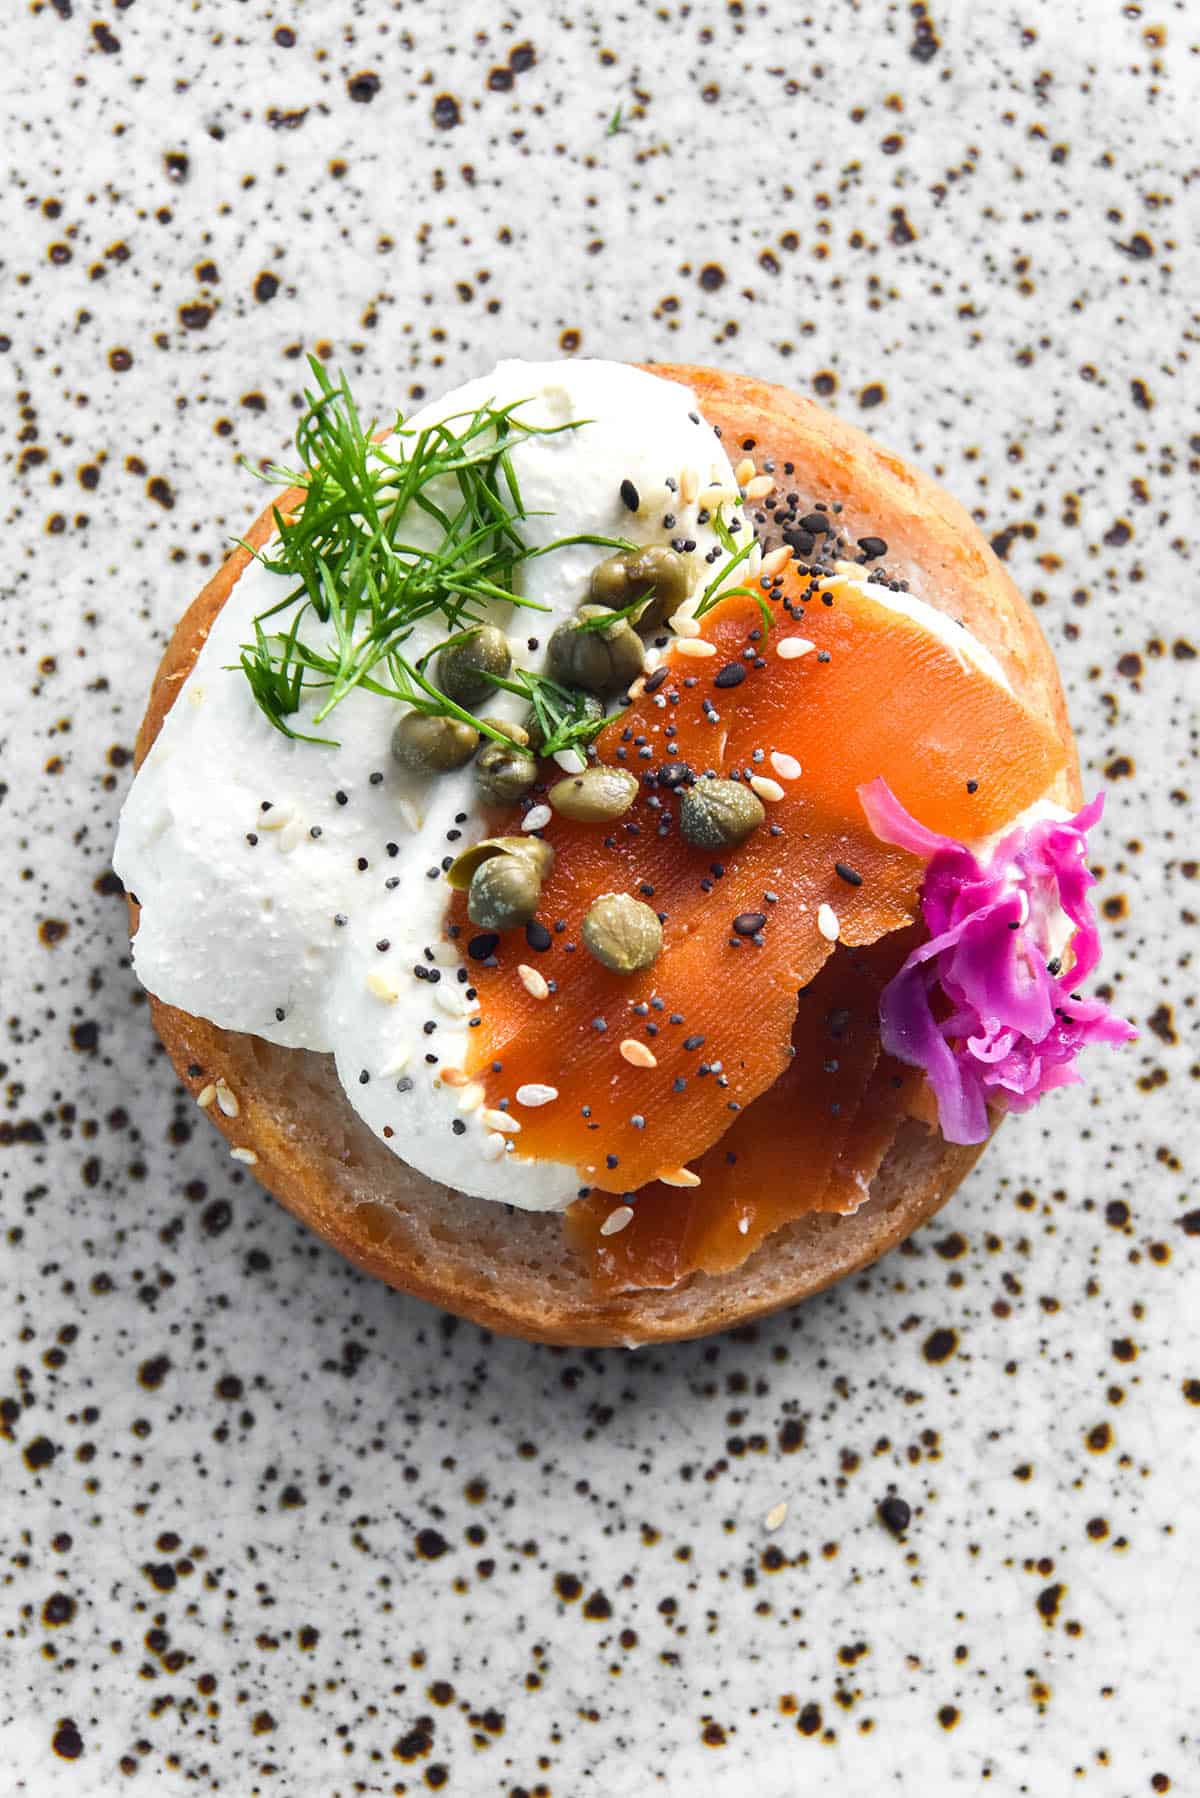 An aerial image of a gluten free bagel half topped with whipped mascarpone cream, carrot lox, capers, dill, FODMAP friendly 'pickled red onion' and FODMAP friendly everything bagel seasoning. The bagel sits in the centre of a white speckled ceramic plate